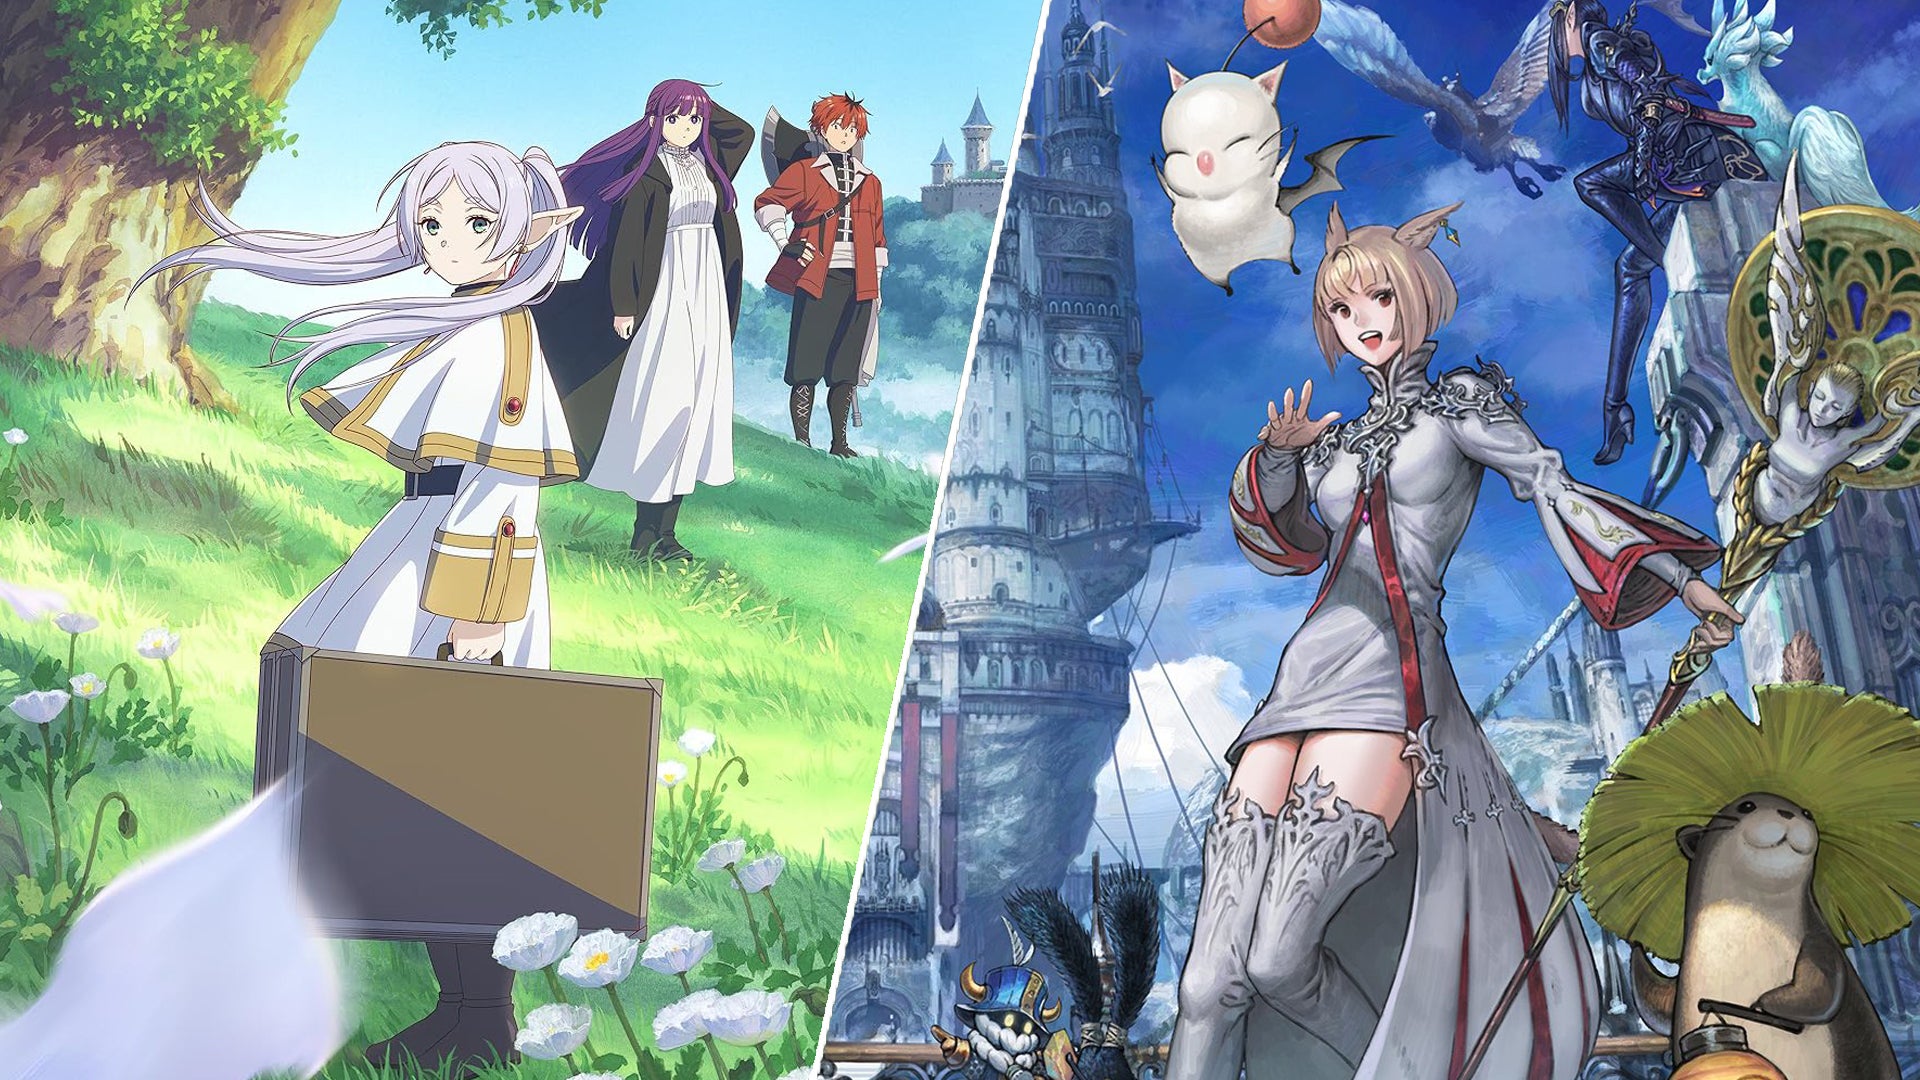 See the Full FFXIV Anime Commercial - Siliconera